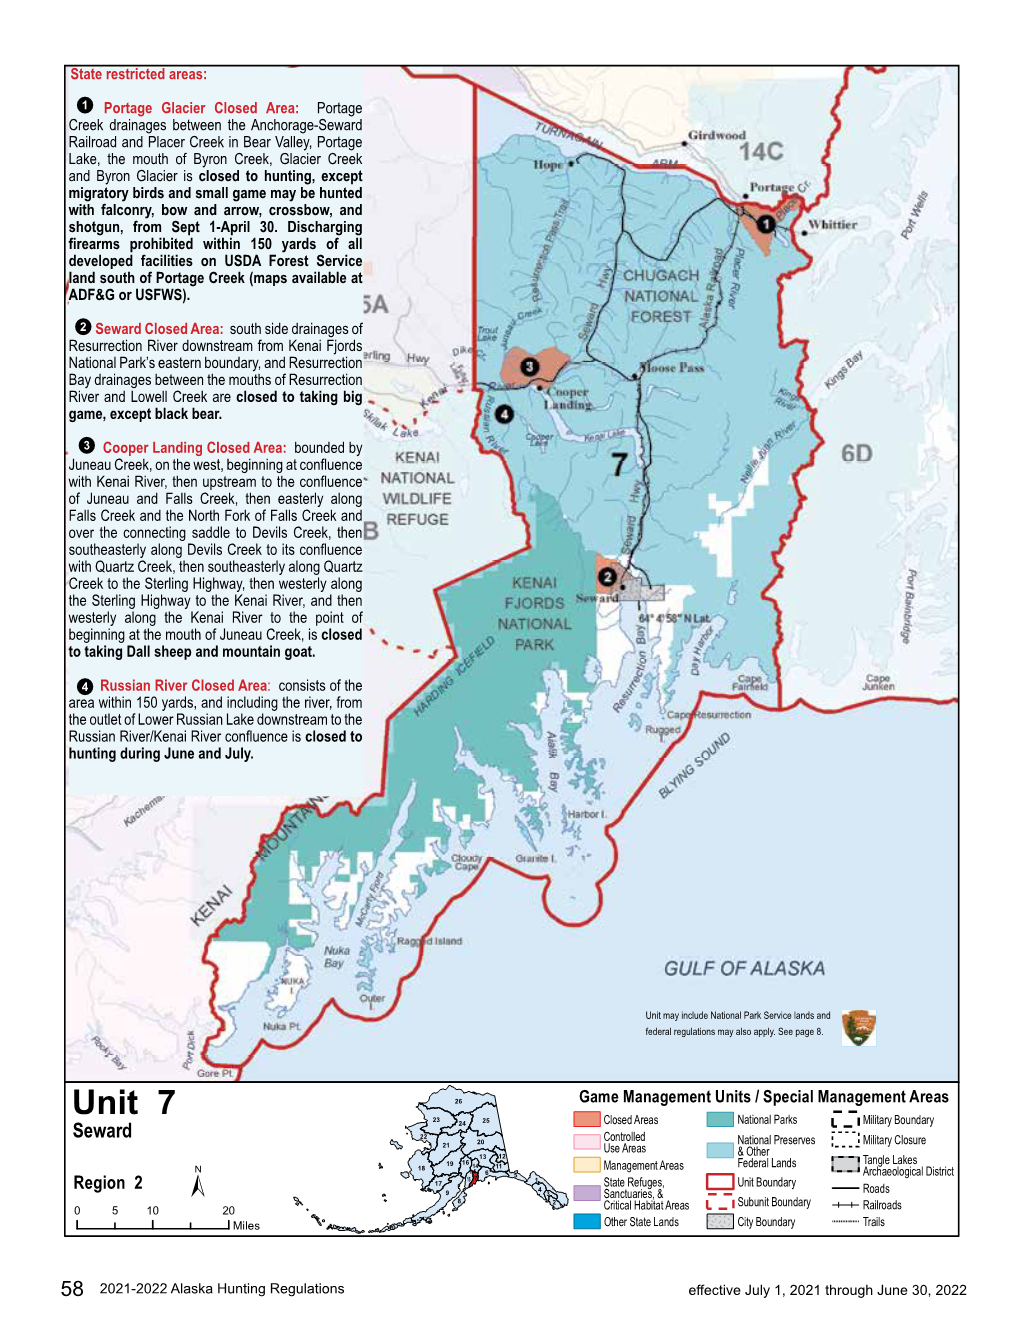 2021-2022 Alaska Hunting Regulations Effective July 1, 2021 Through June 30, 2022 Unit 7 Seward See Map on Page 58 for State Restricted Areas in Unit 7